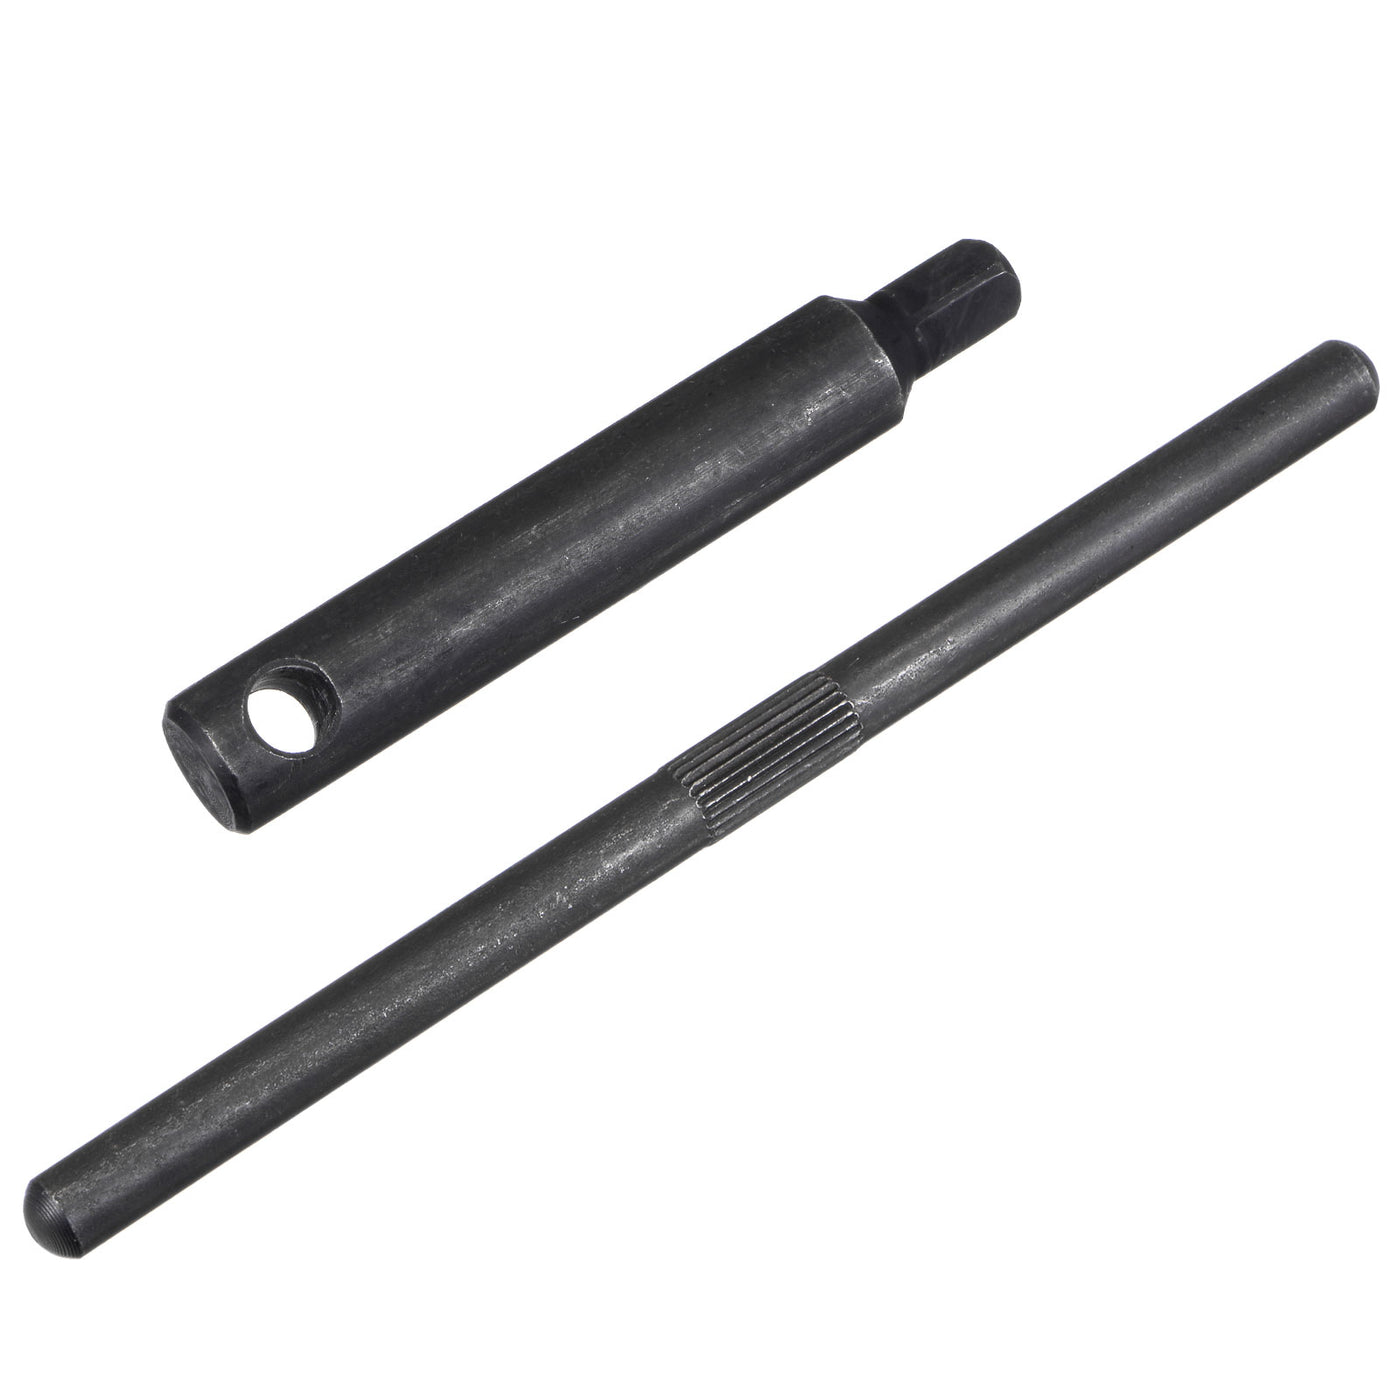 Uxcell Uxcell Lathe Chuck Wrench, 14mm Square Head Key Spanner Tool, 2 Pcs (L200x250mm)